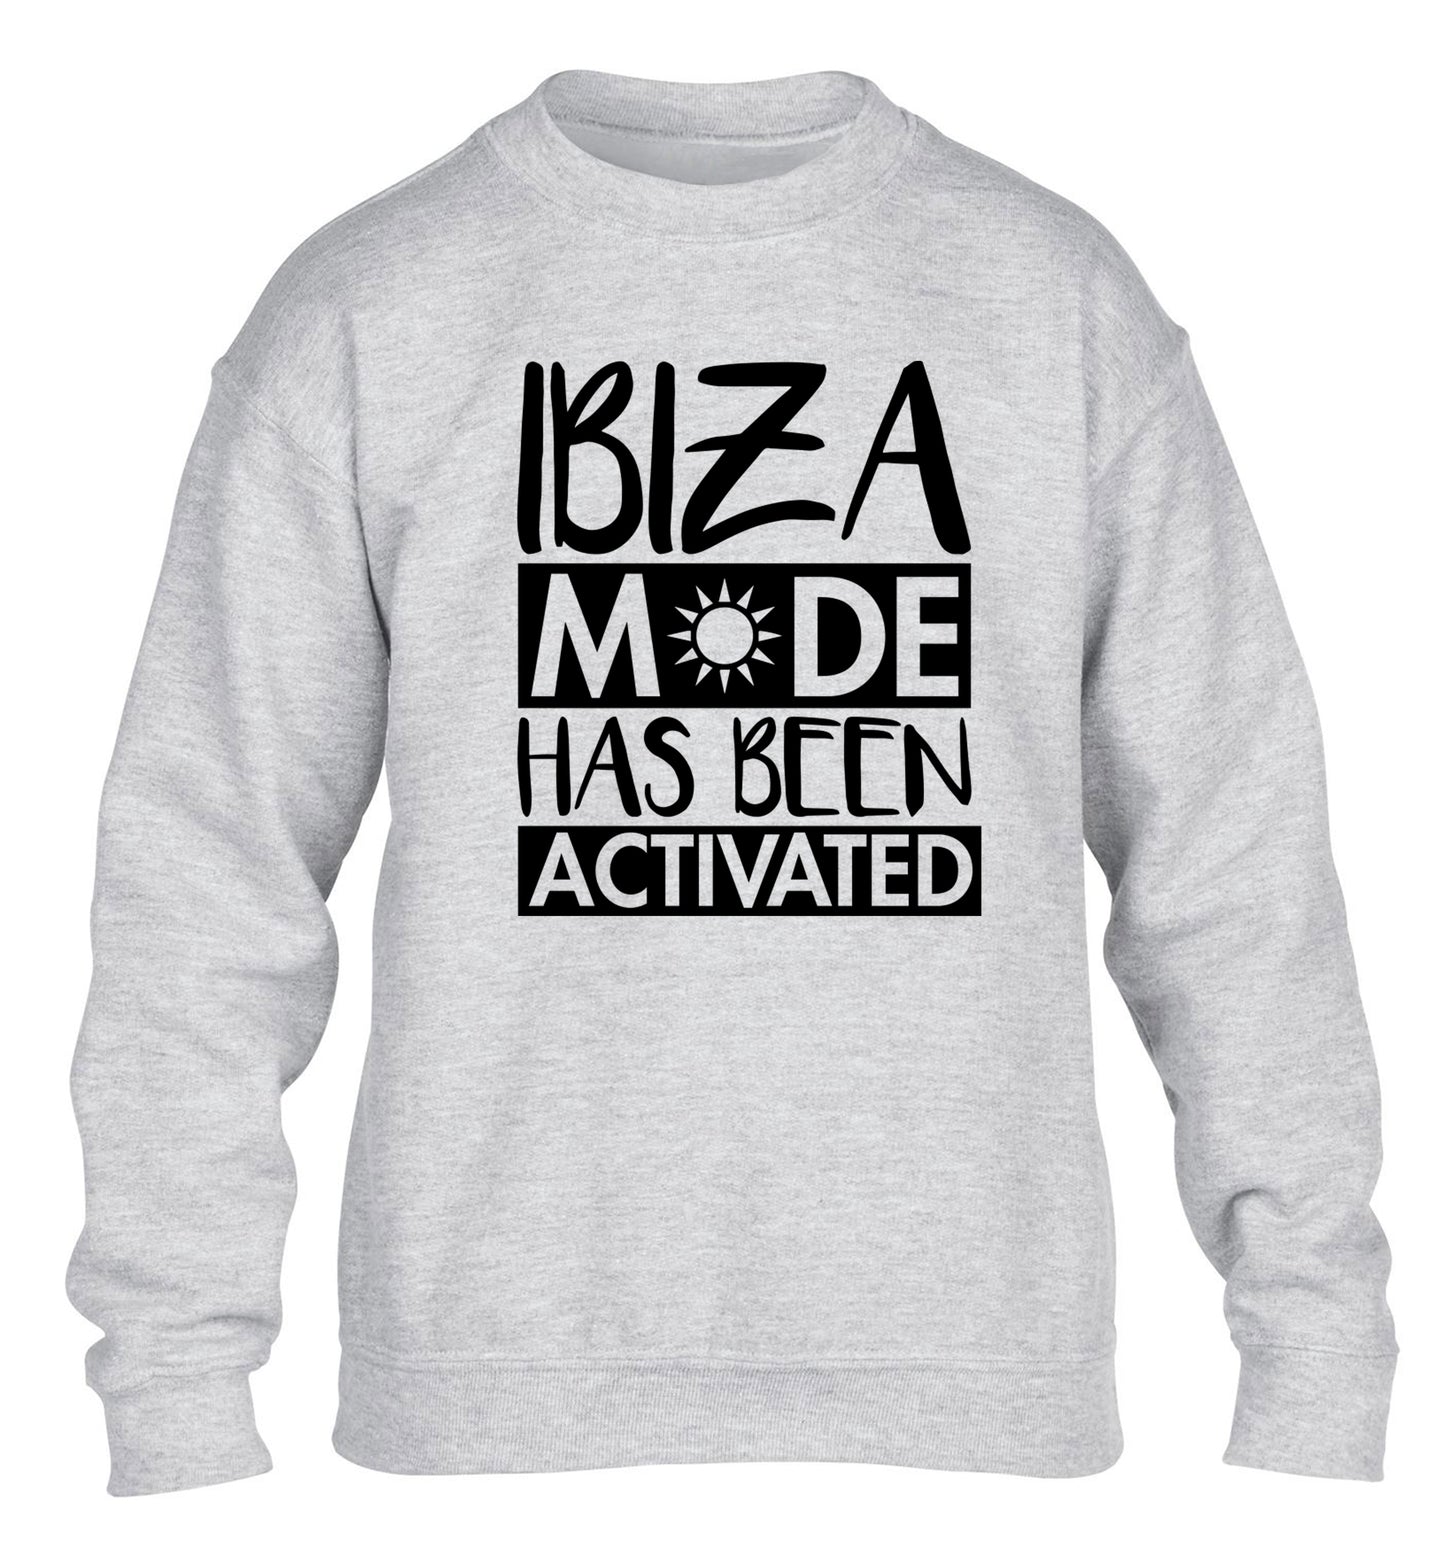 Ibiza mode has been activated children's grey sweater 12-13 Years